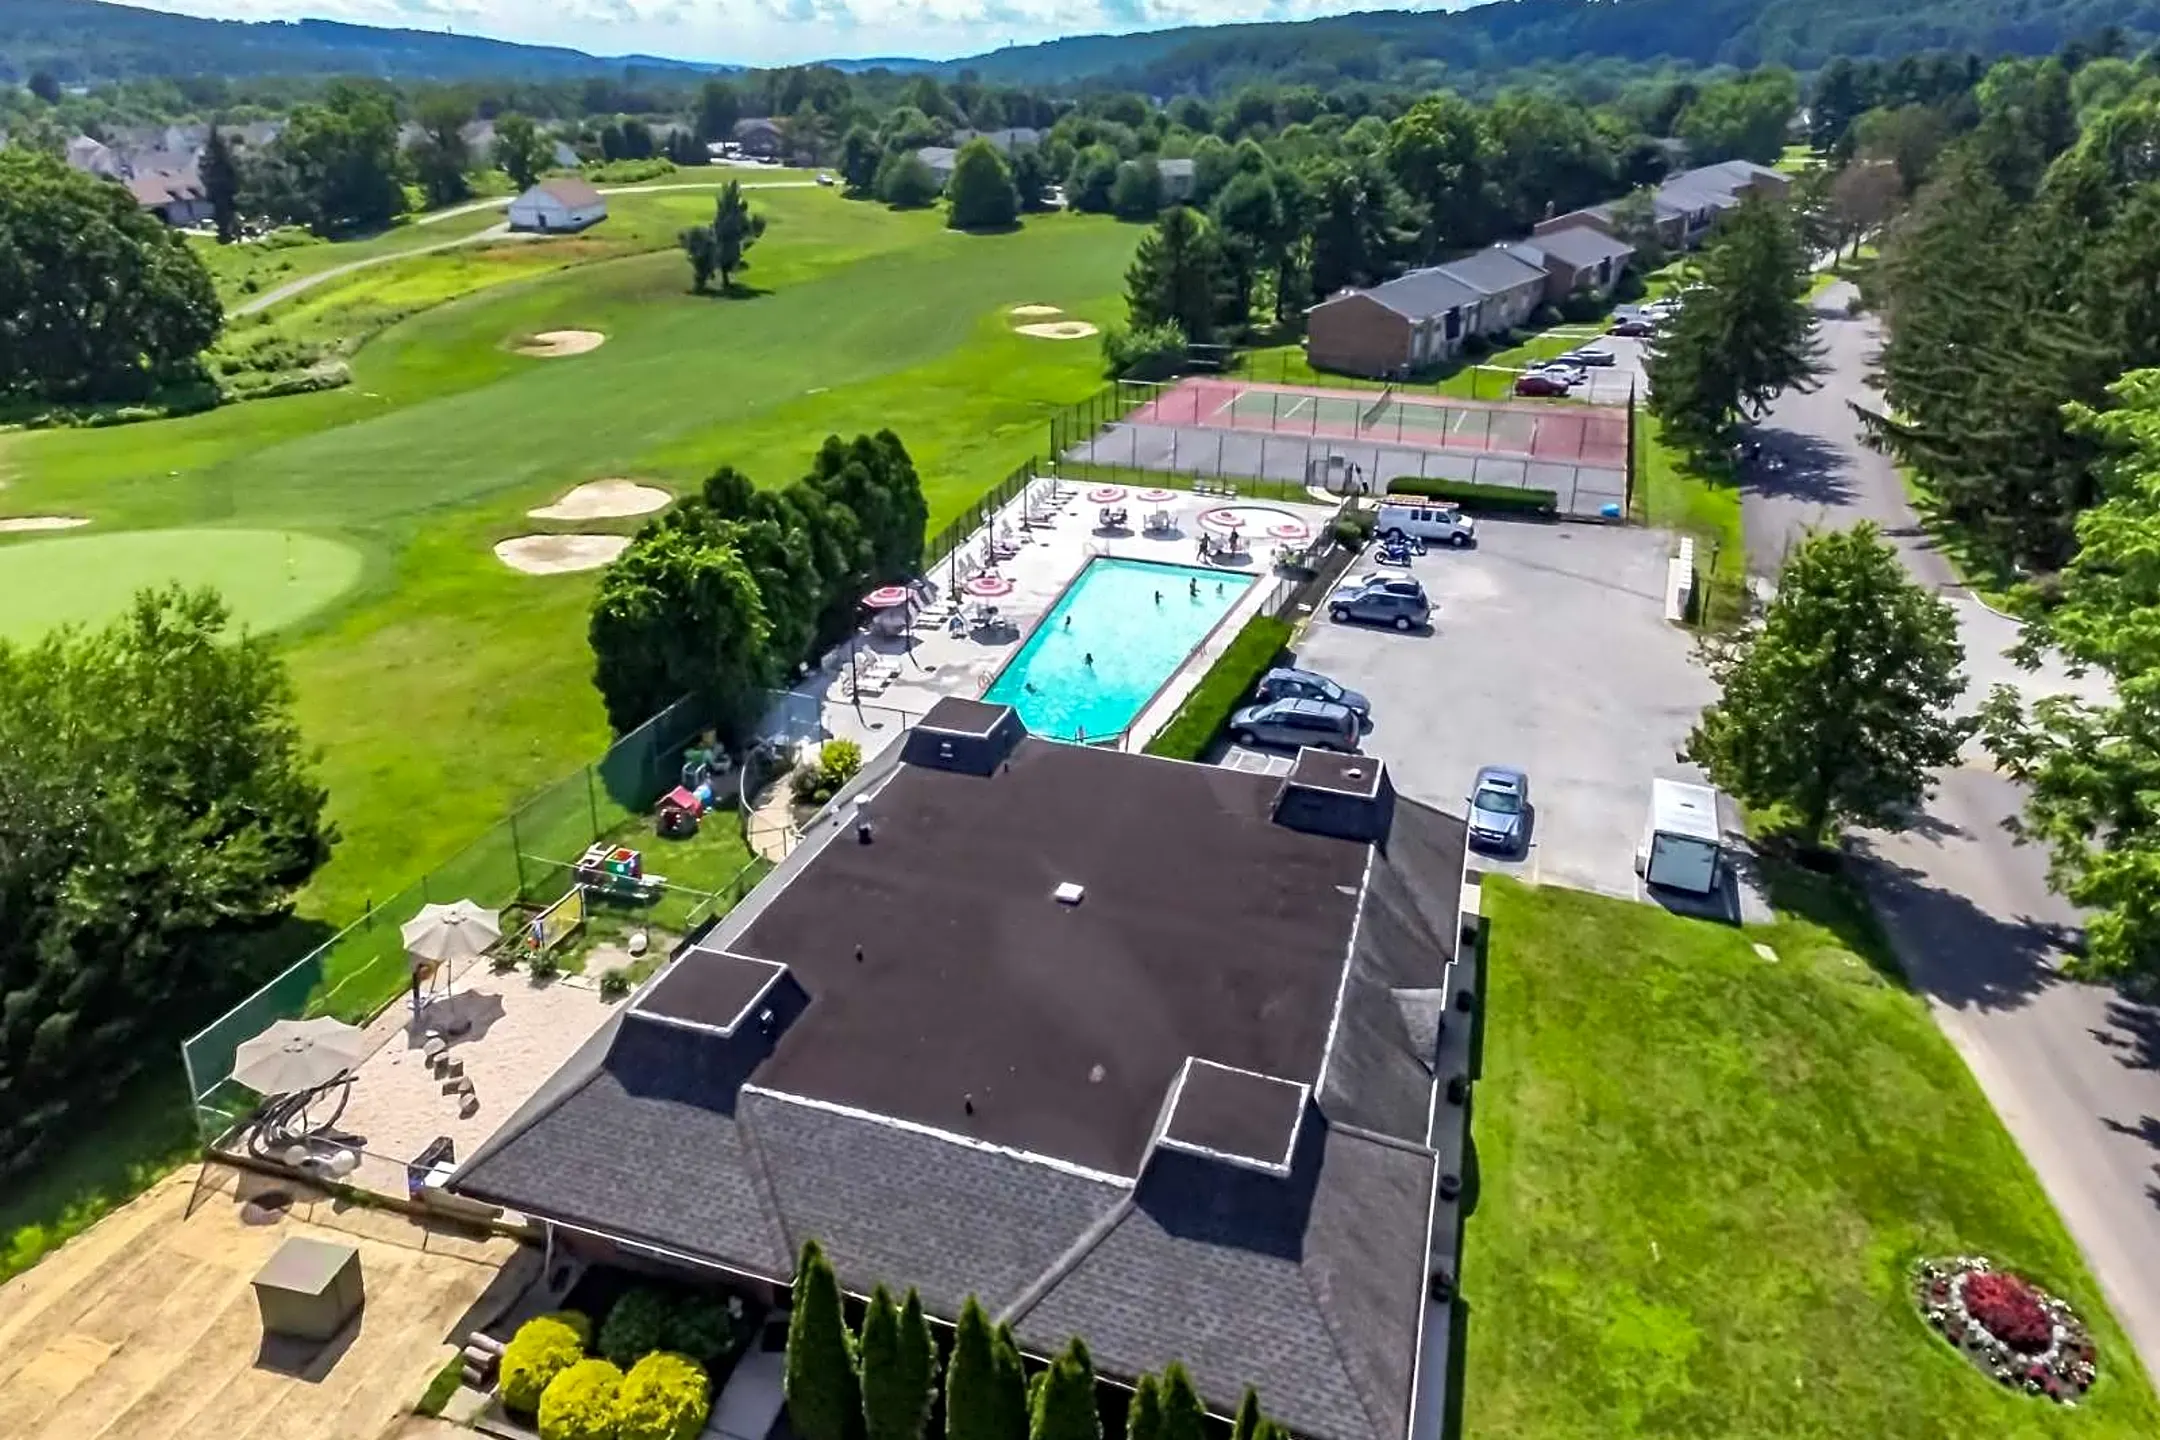 Pool - The Fairways Apartments & Townhomes - Thorndale, PA